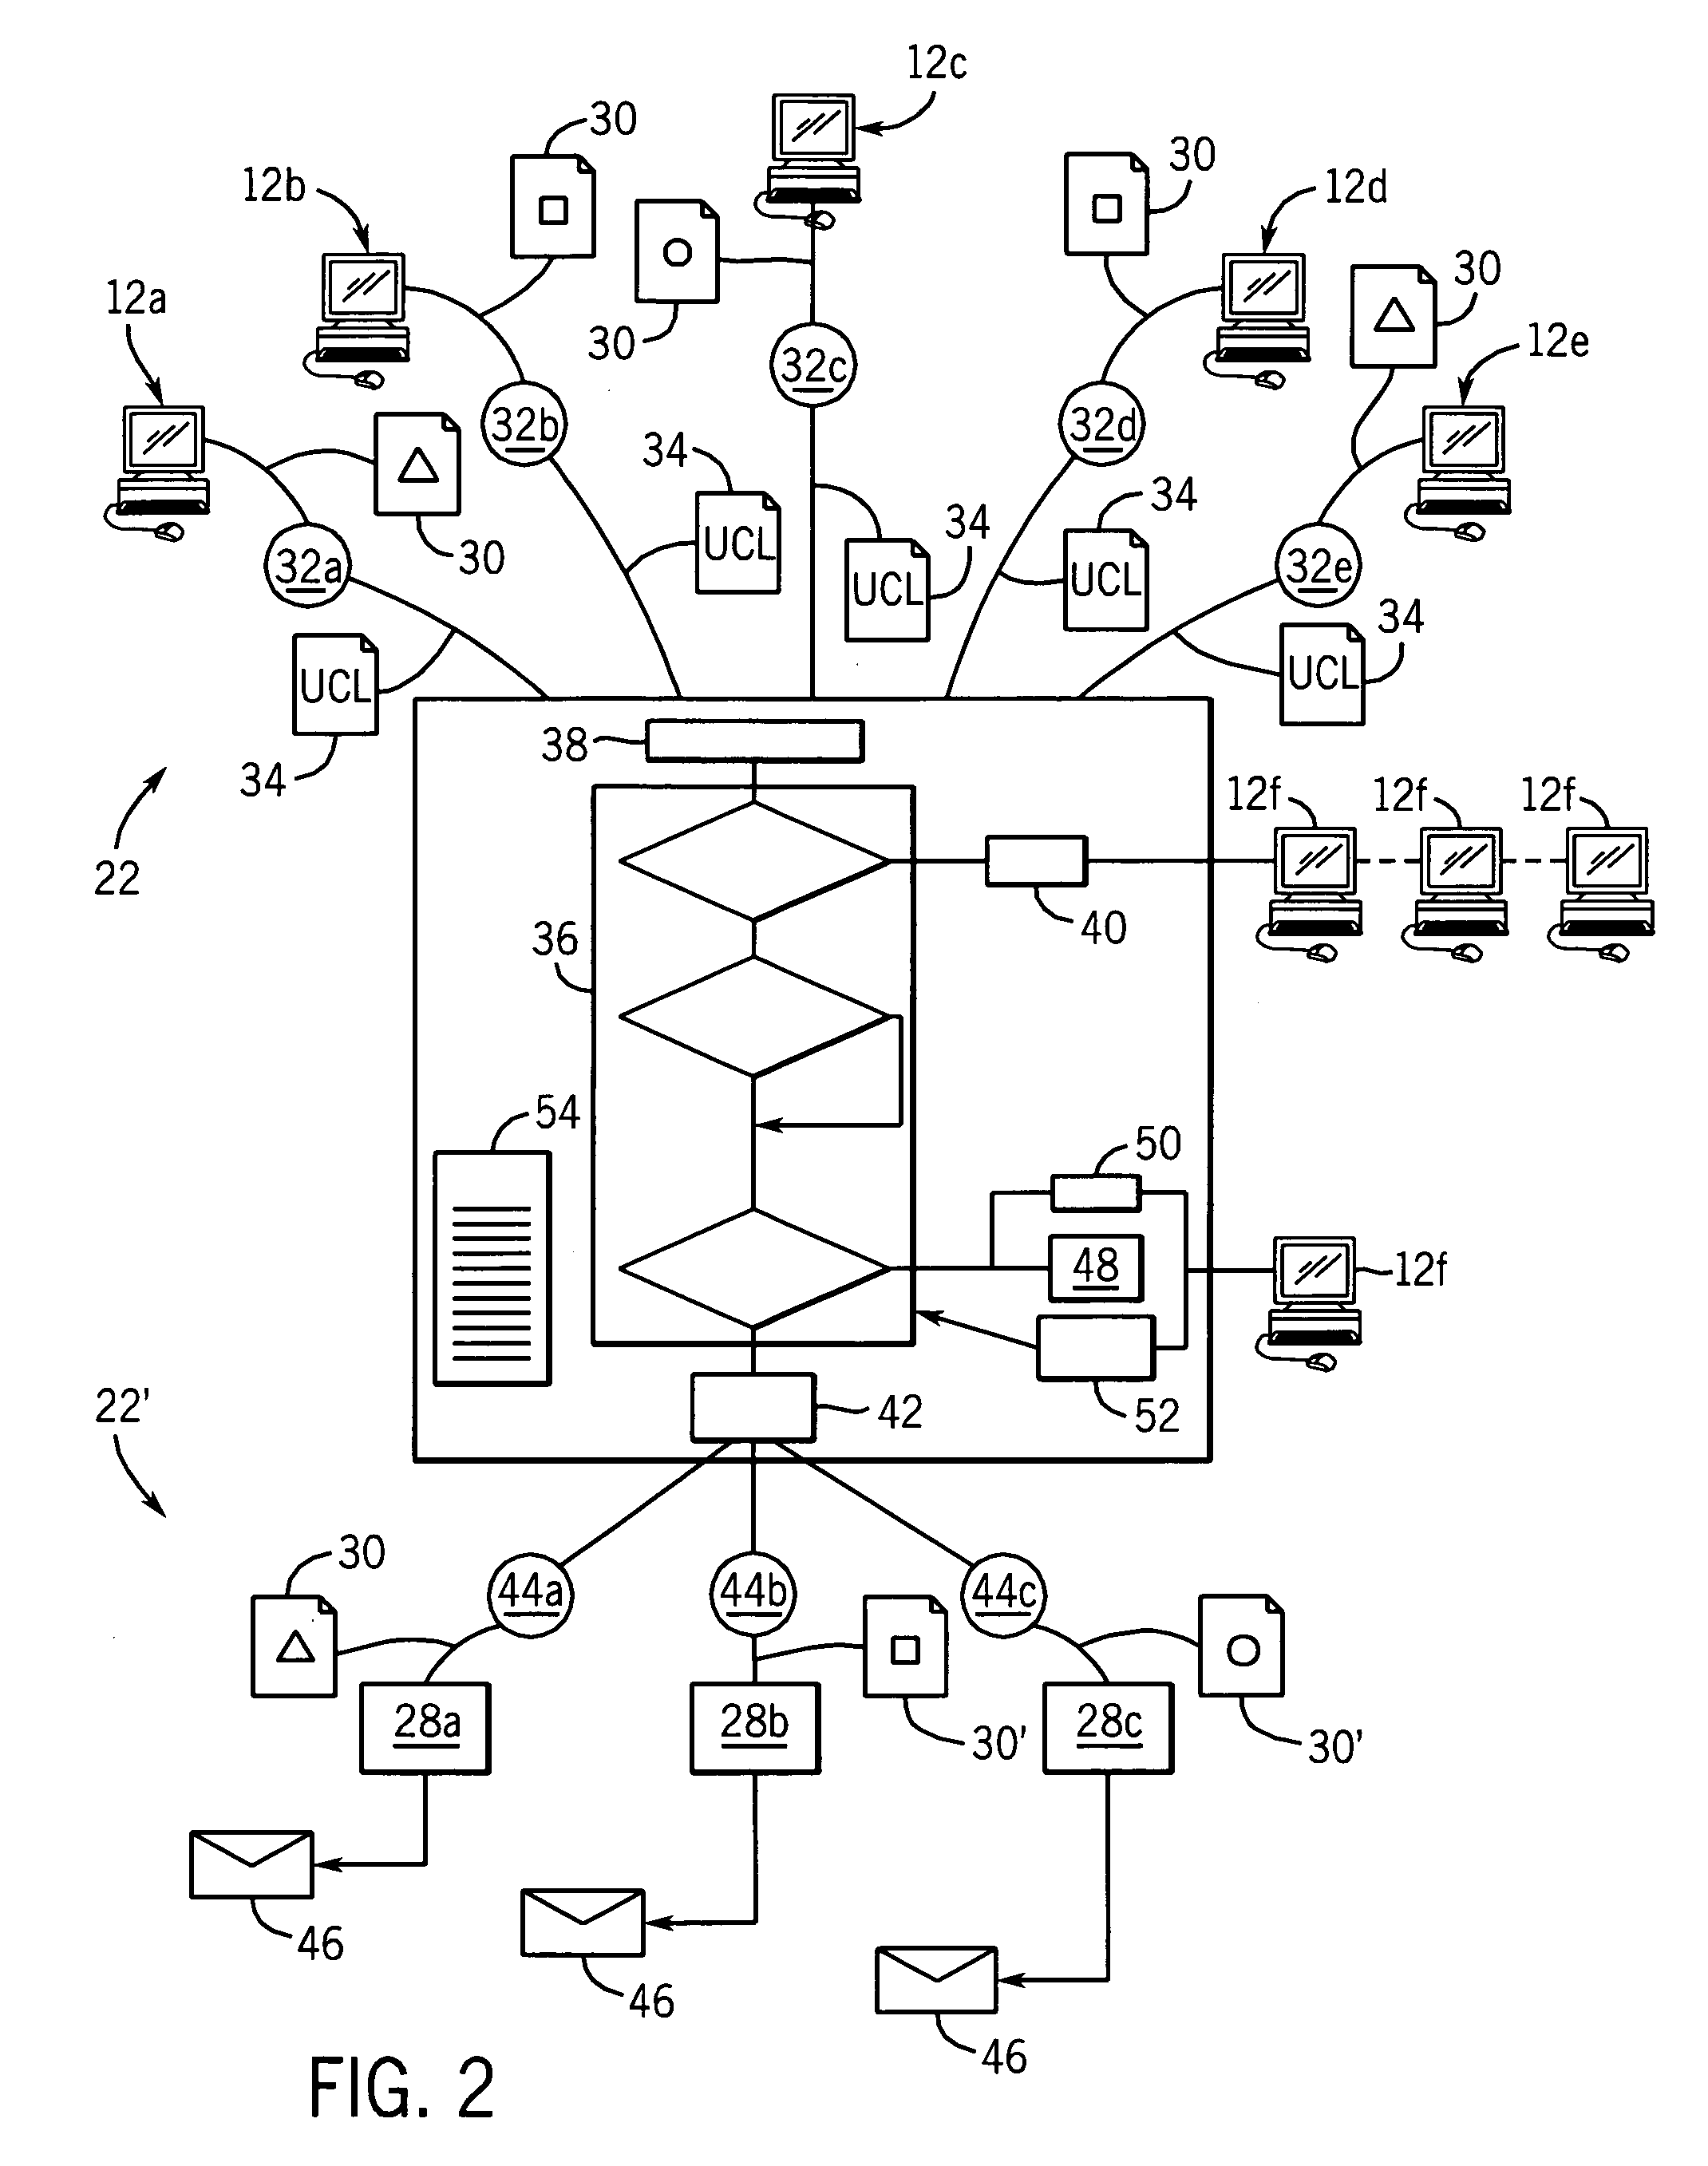 Universal charge routing system for medical billing